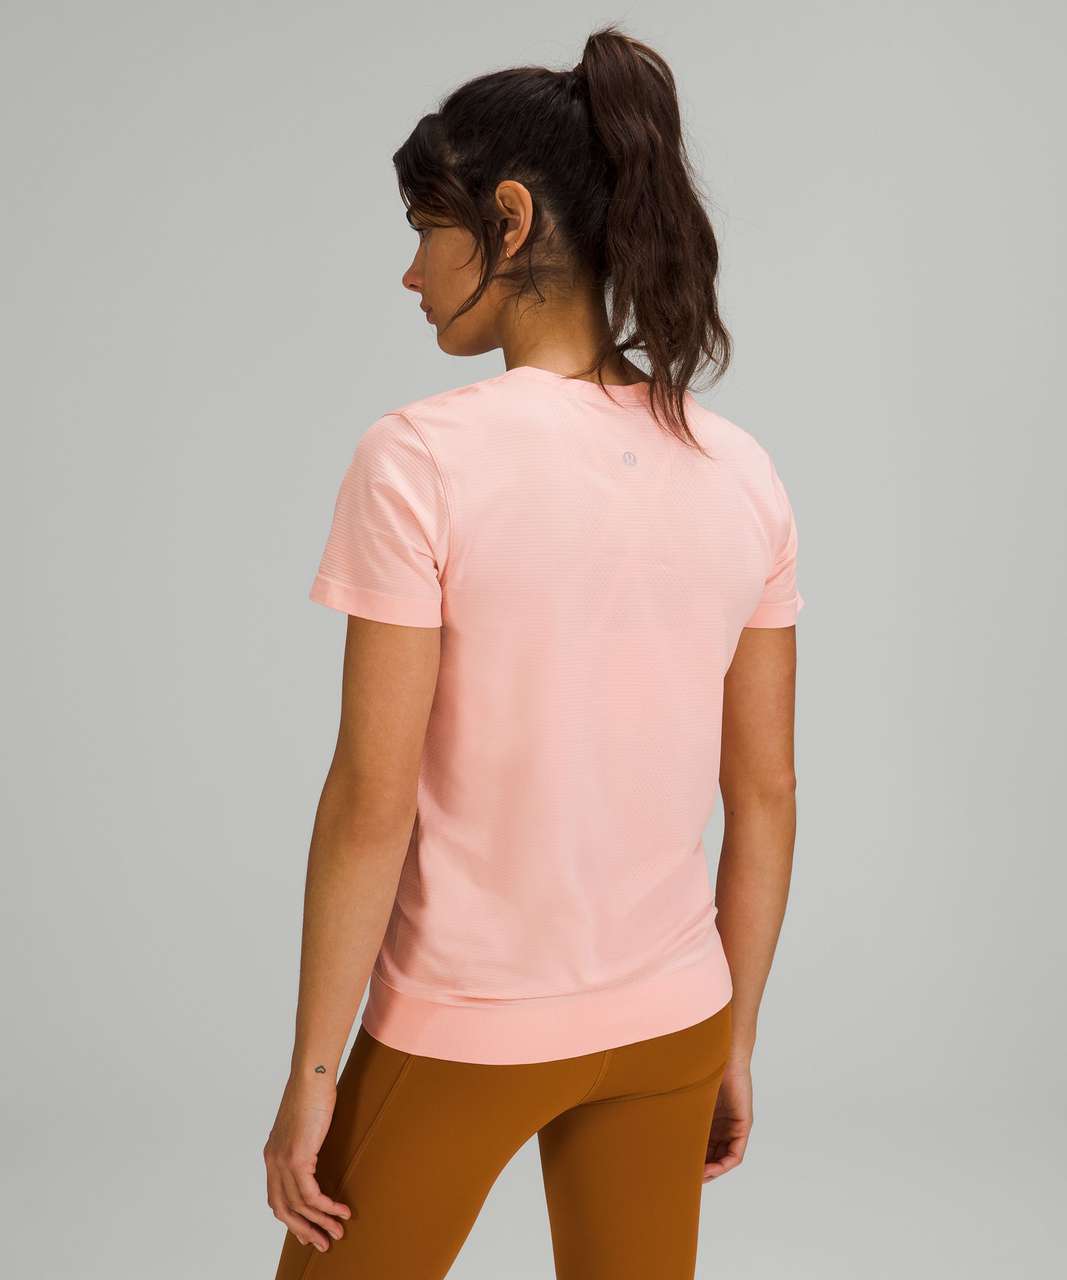 Lululemon Swiftly Relaxed Short Sleeve T-Shirt - Dew Pink / Dew Pink